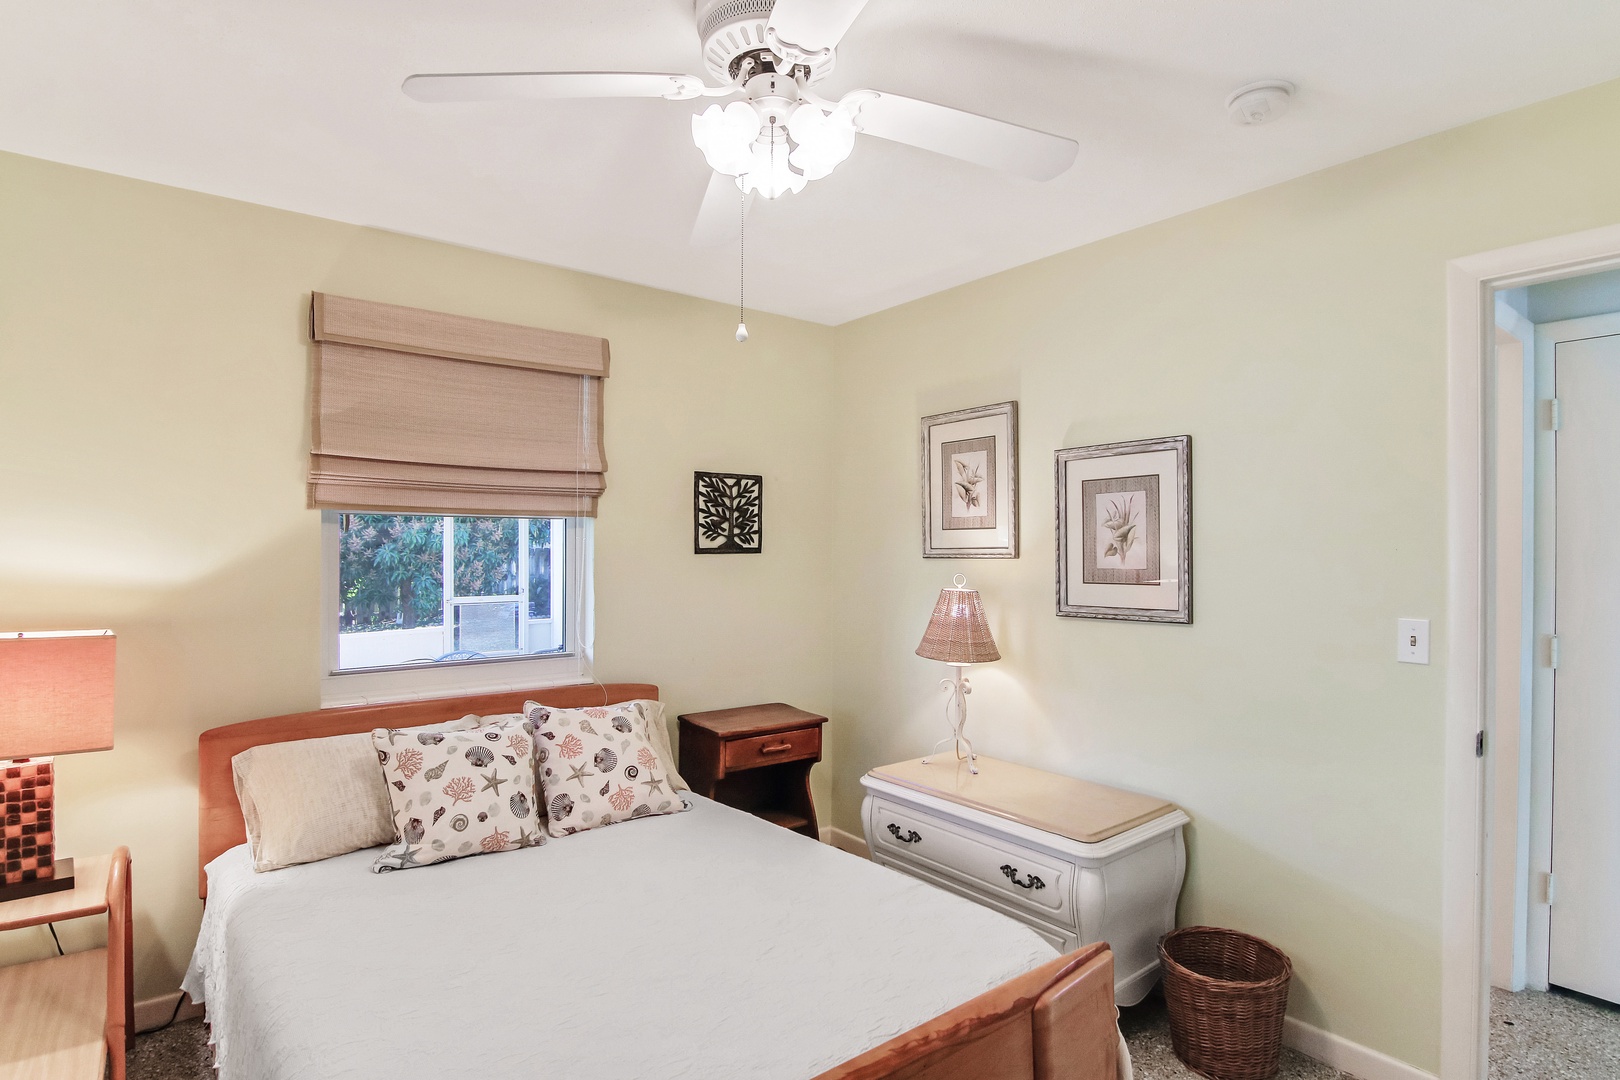 The first of two additional bedrooms, showcasing a plush queen-sized bed